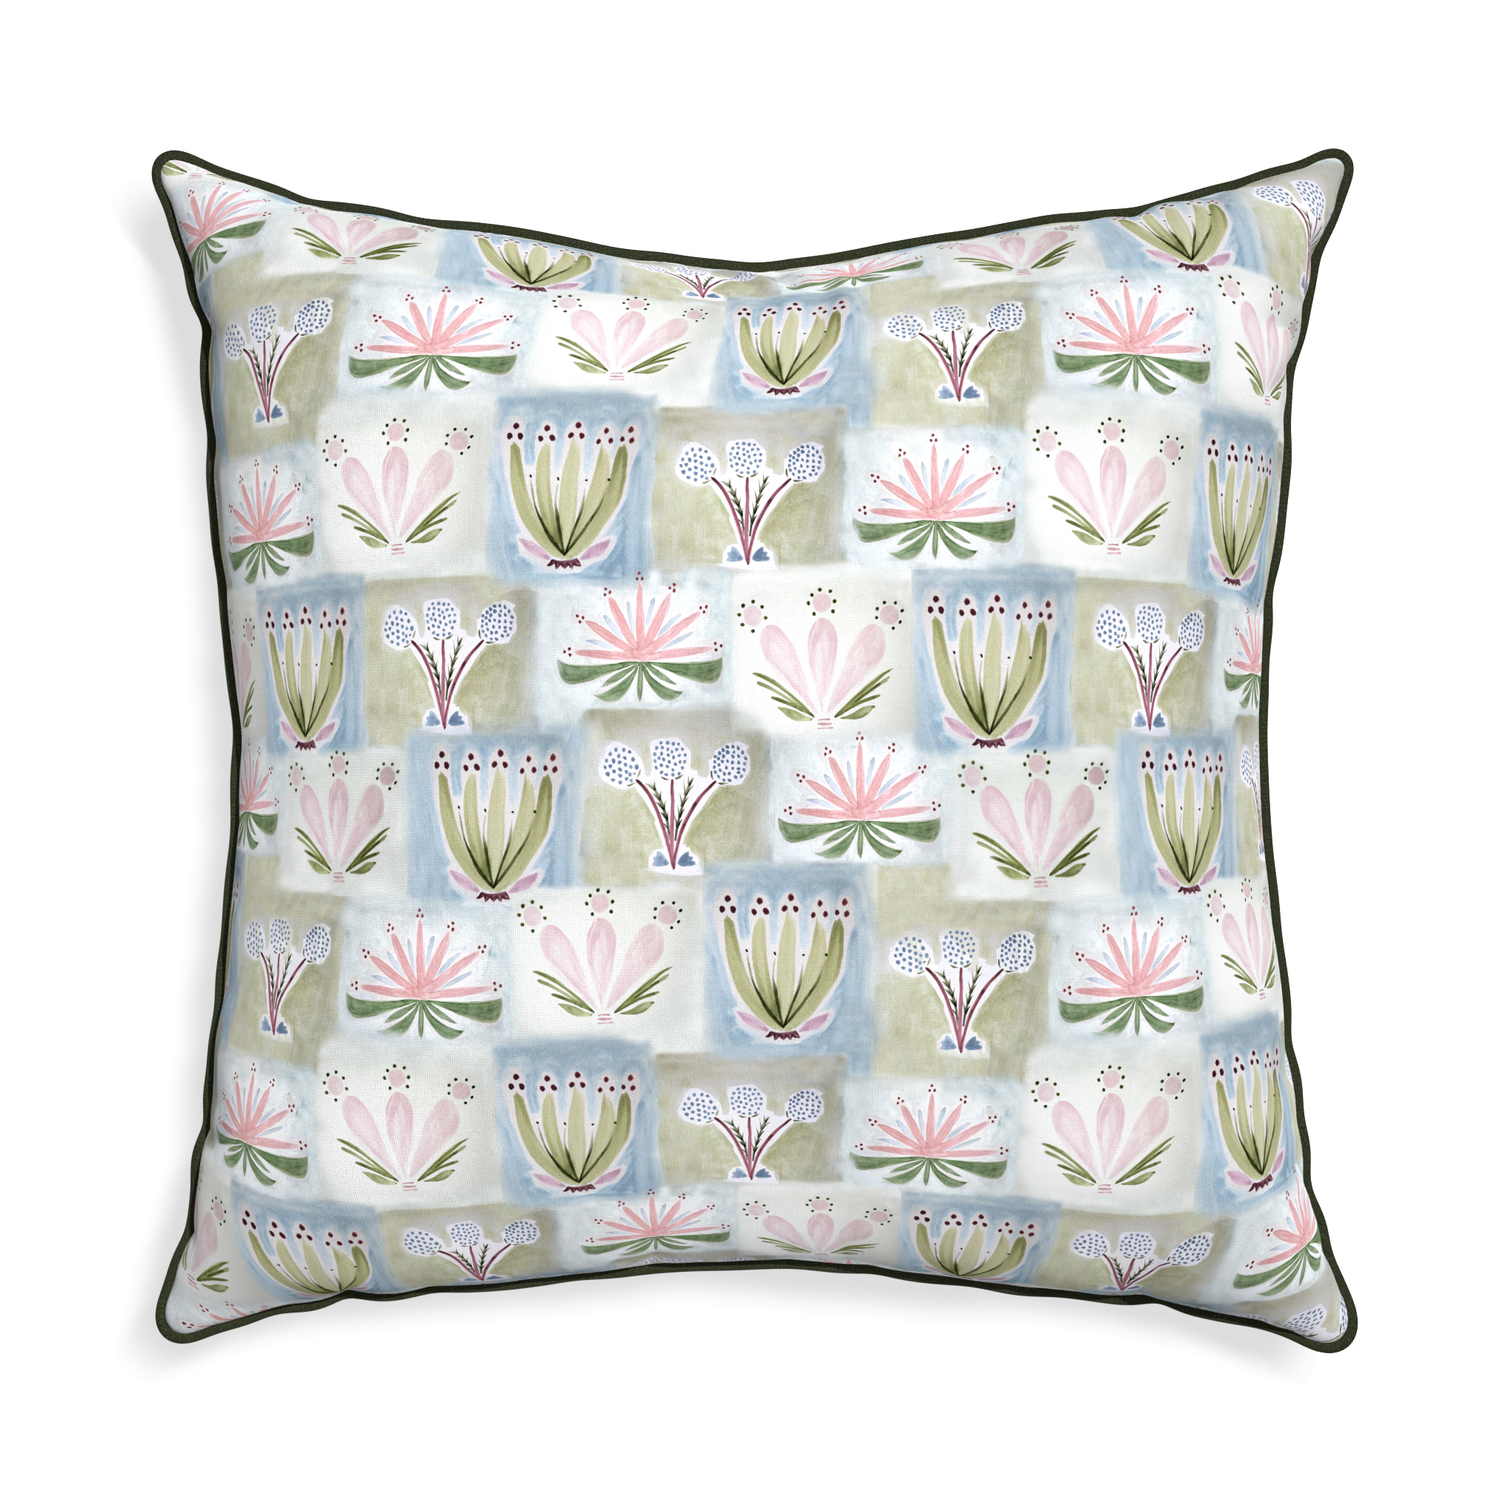 Euro-sham harper custom hand-painted floralpillow with f piping on white background